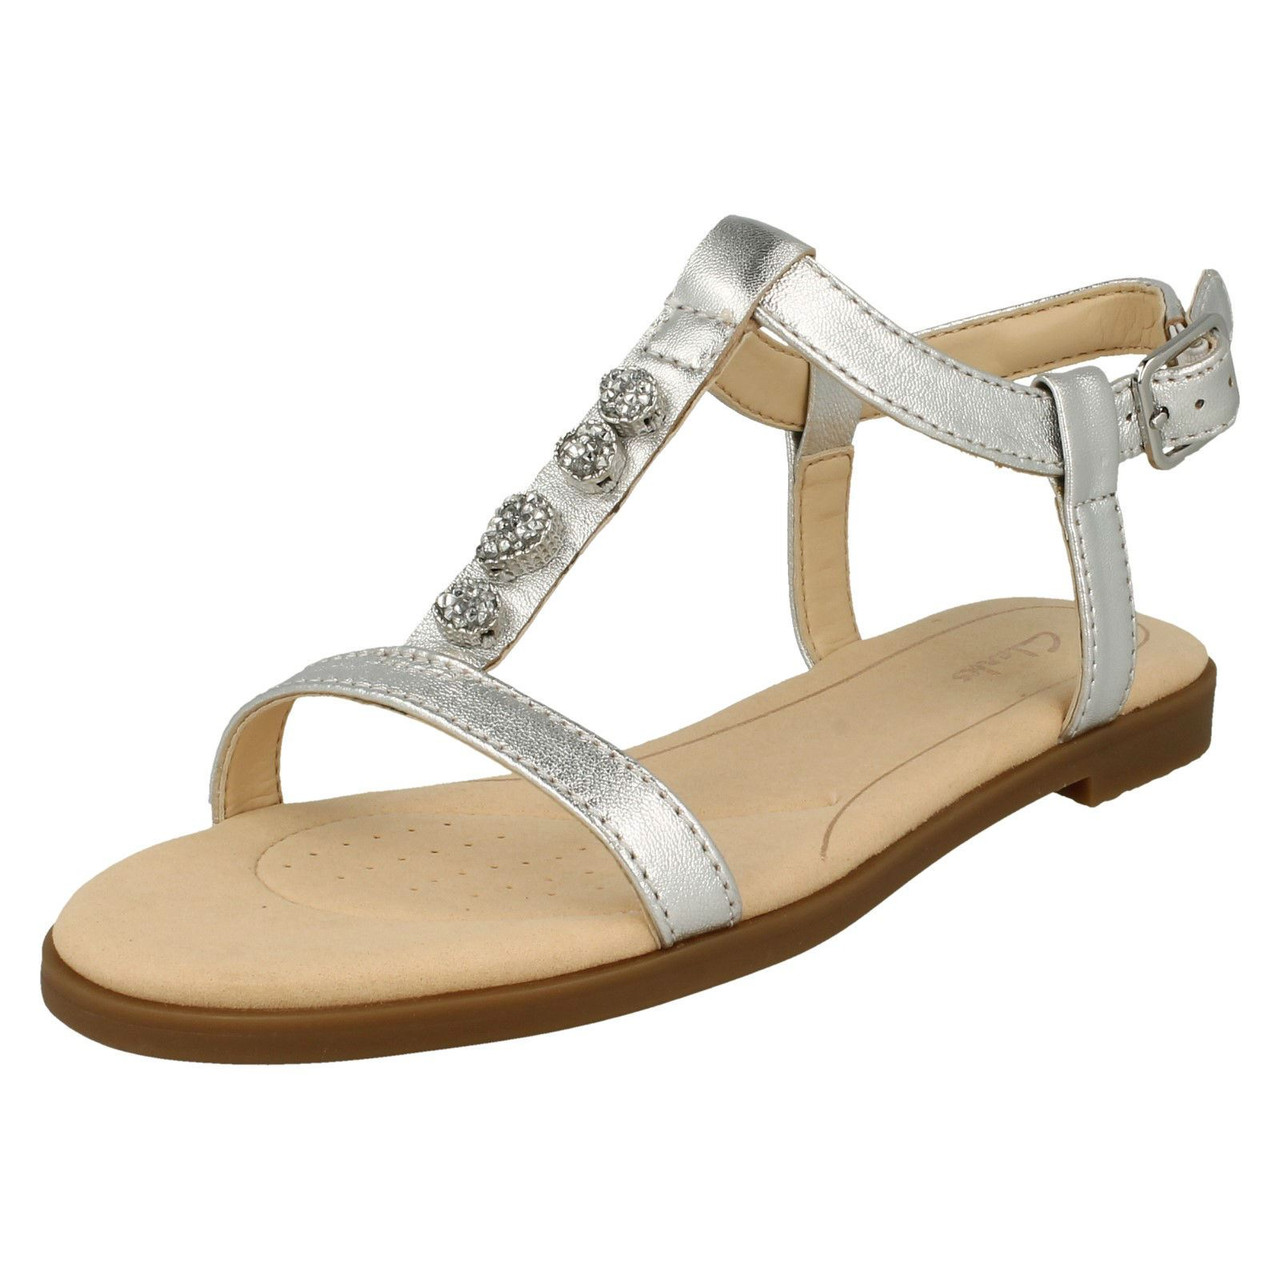 clarks blossom sandals